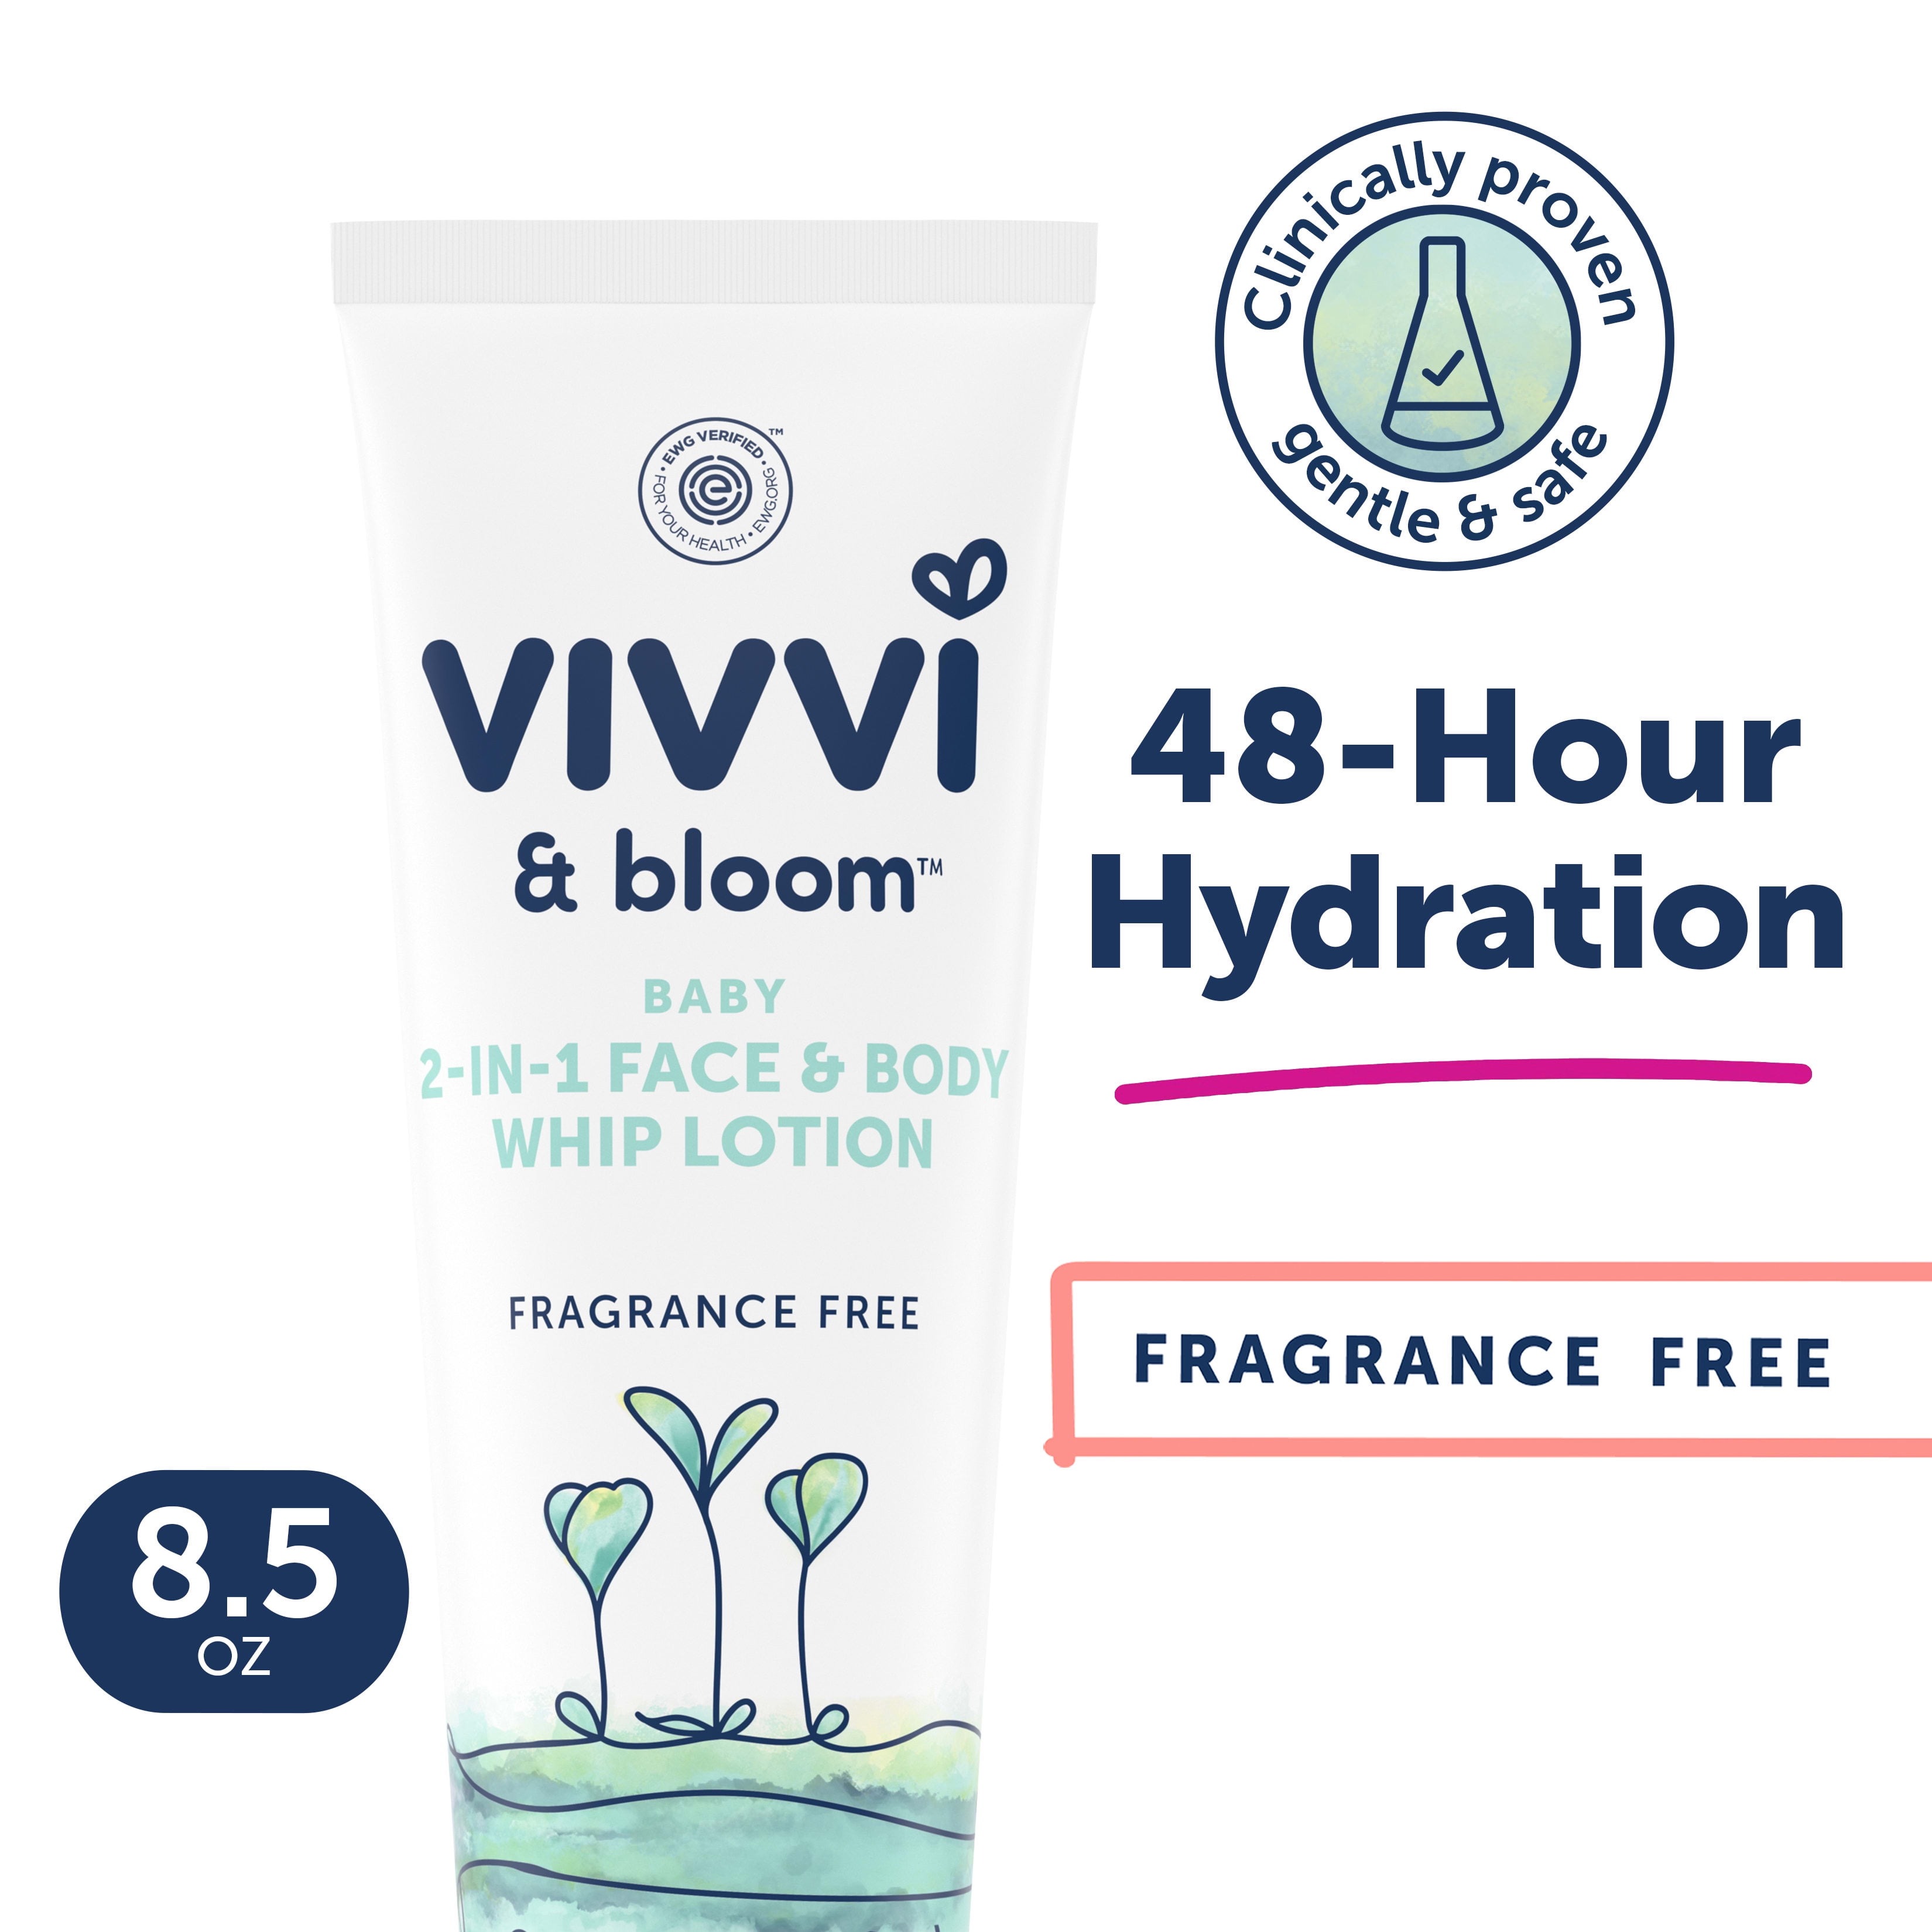 Vivvi & Bloom 2-in-1 Baby Face & Body Whip Lotion, Fragrance-Free, 8.5 oz